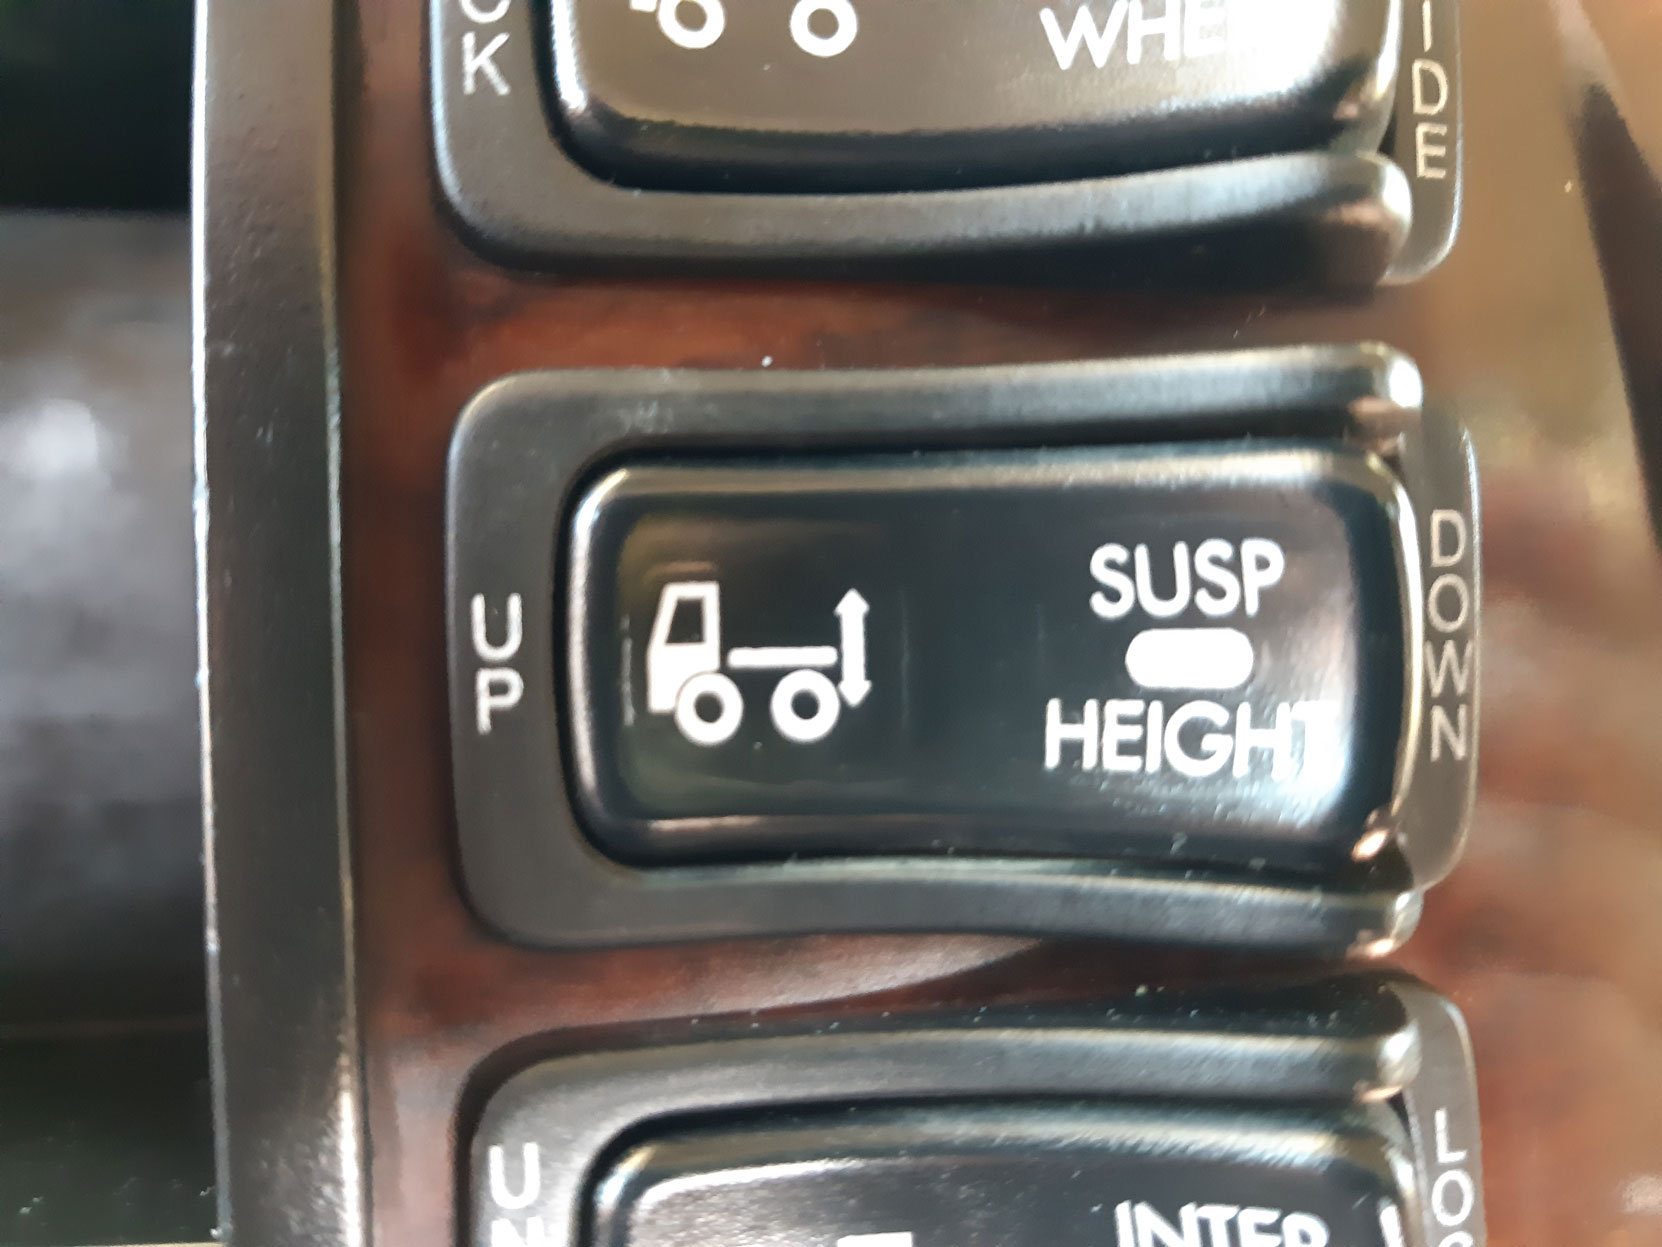 Suspension Height dash switch in our Mack Vision day cab (photo_West Coast Driver Training & Education Inc.)